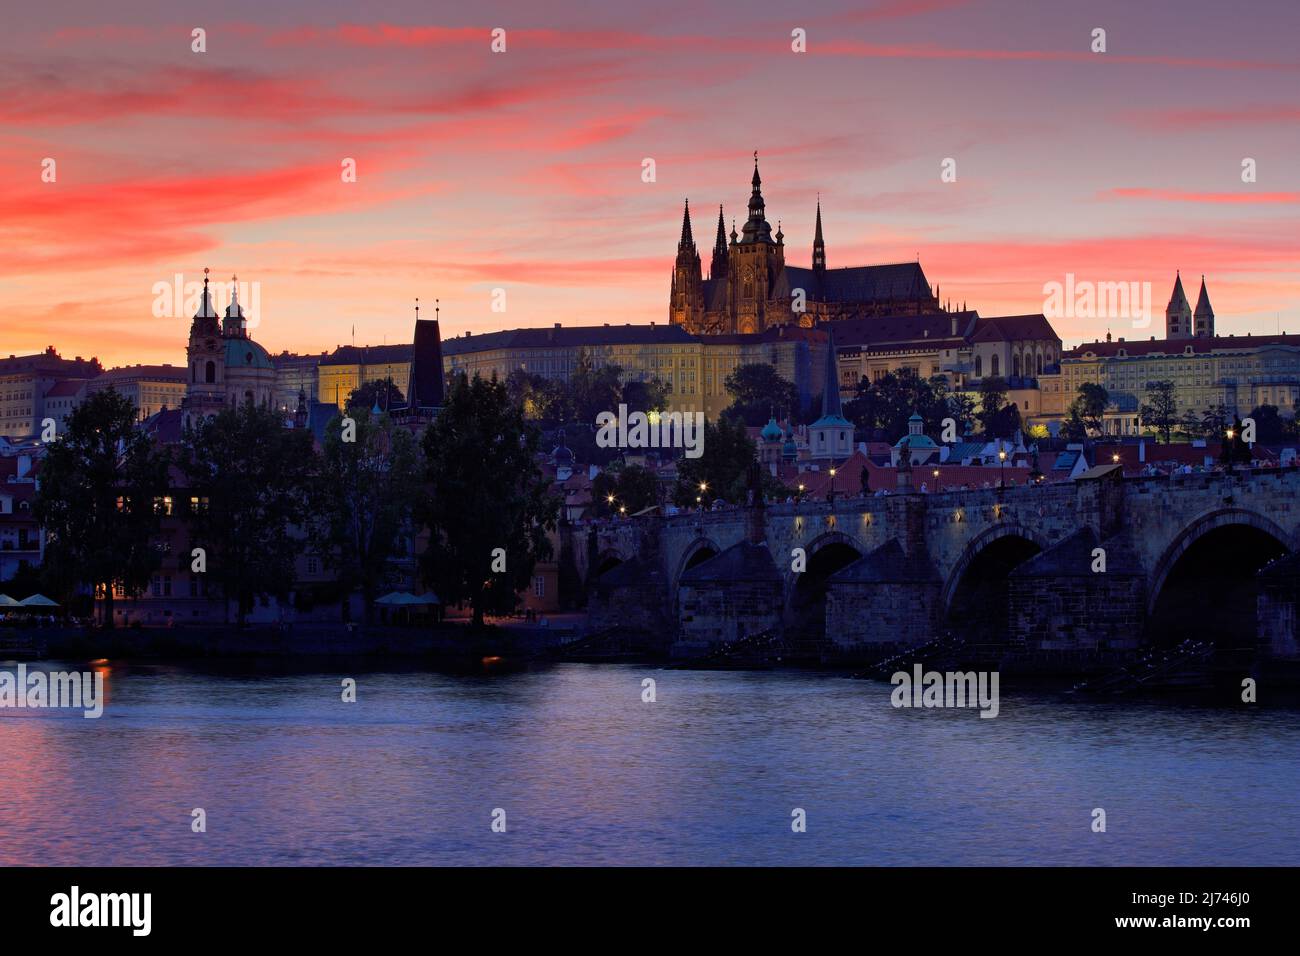 The Prague Castle, gothic style, largest ancient castle in the world and Charles Bridge, built in medieval times, moving boats, Twilight view of Pragu Stock Photo